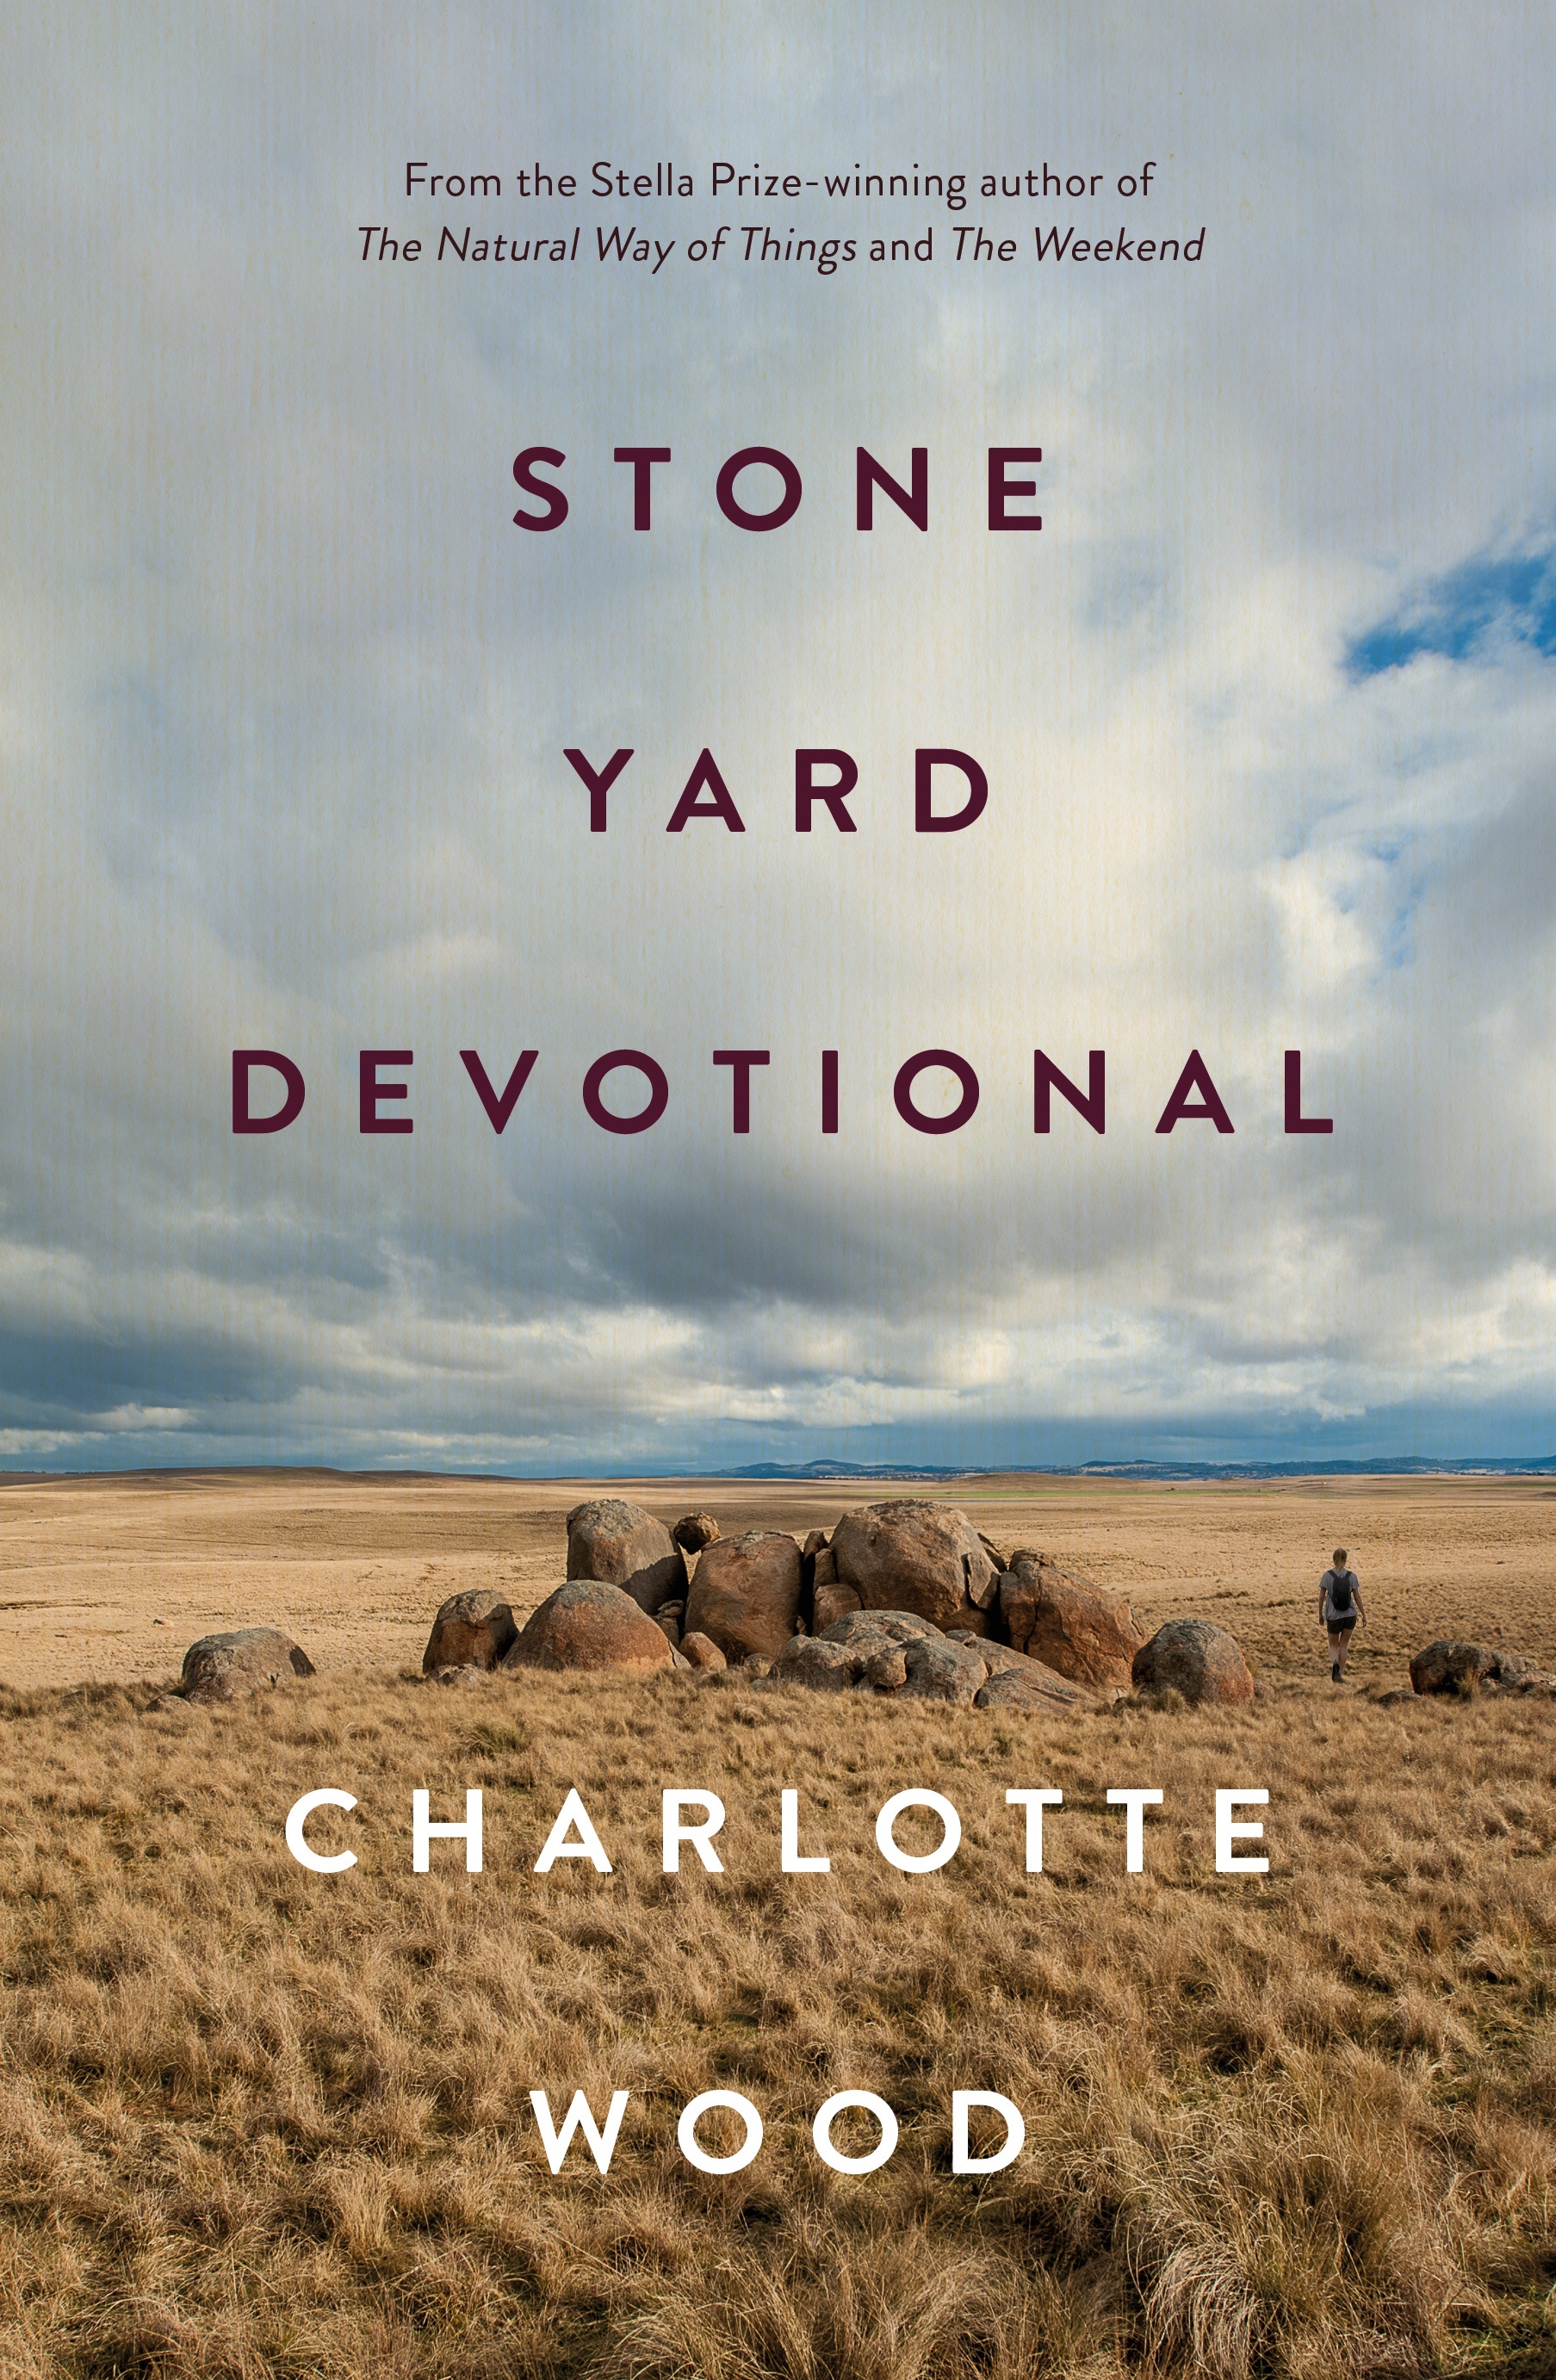 A book cover showing a rural landscape: brown grass, rocks and a cloudy sky and a person in the distance